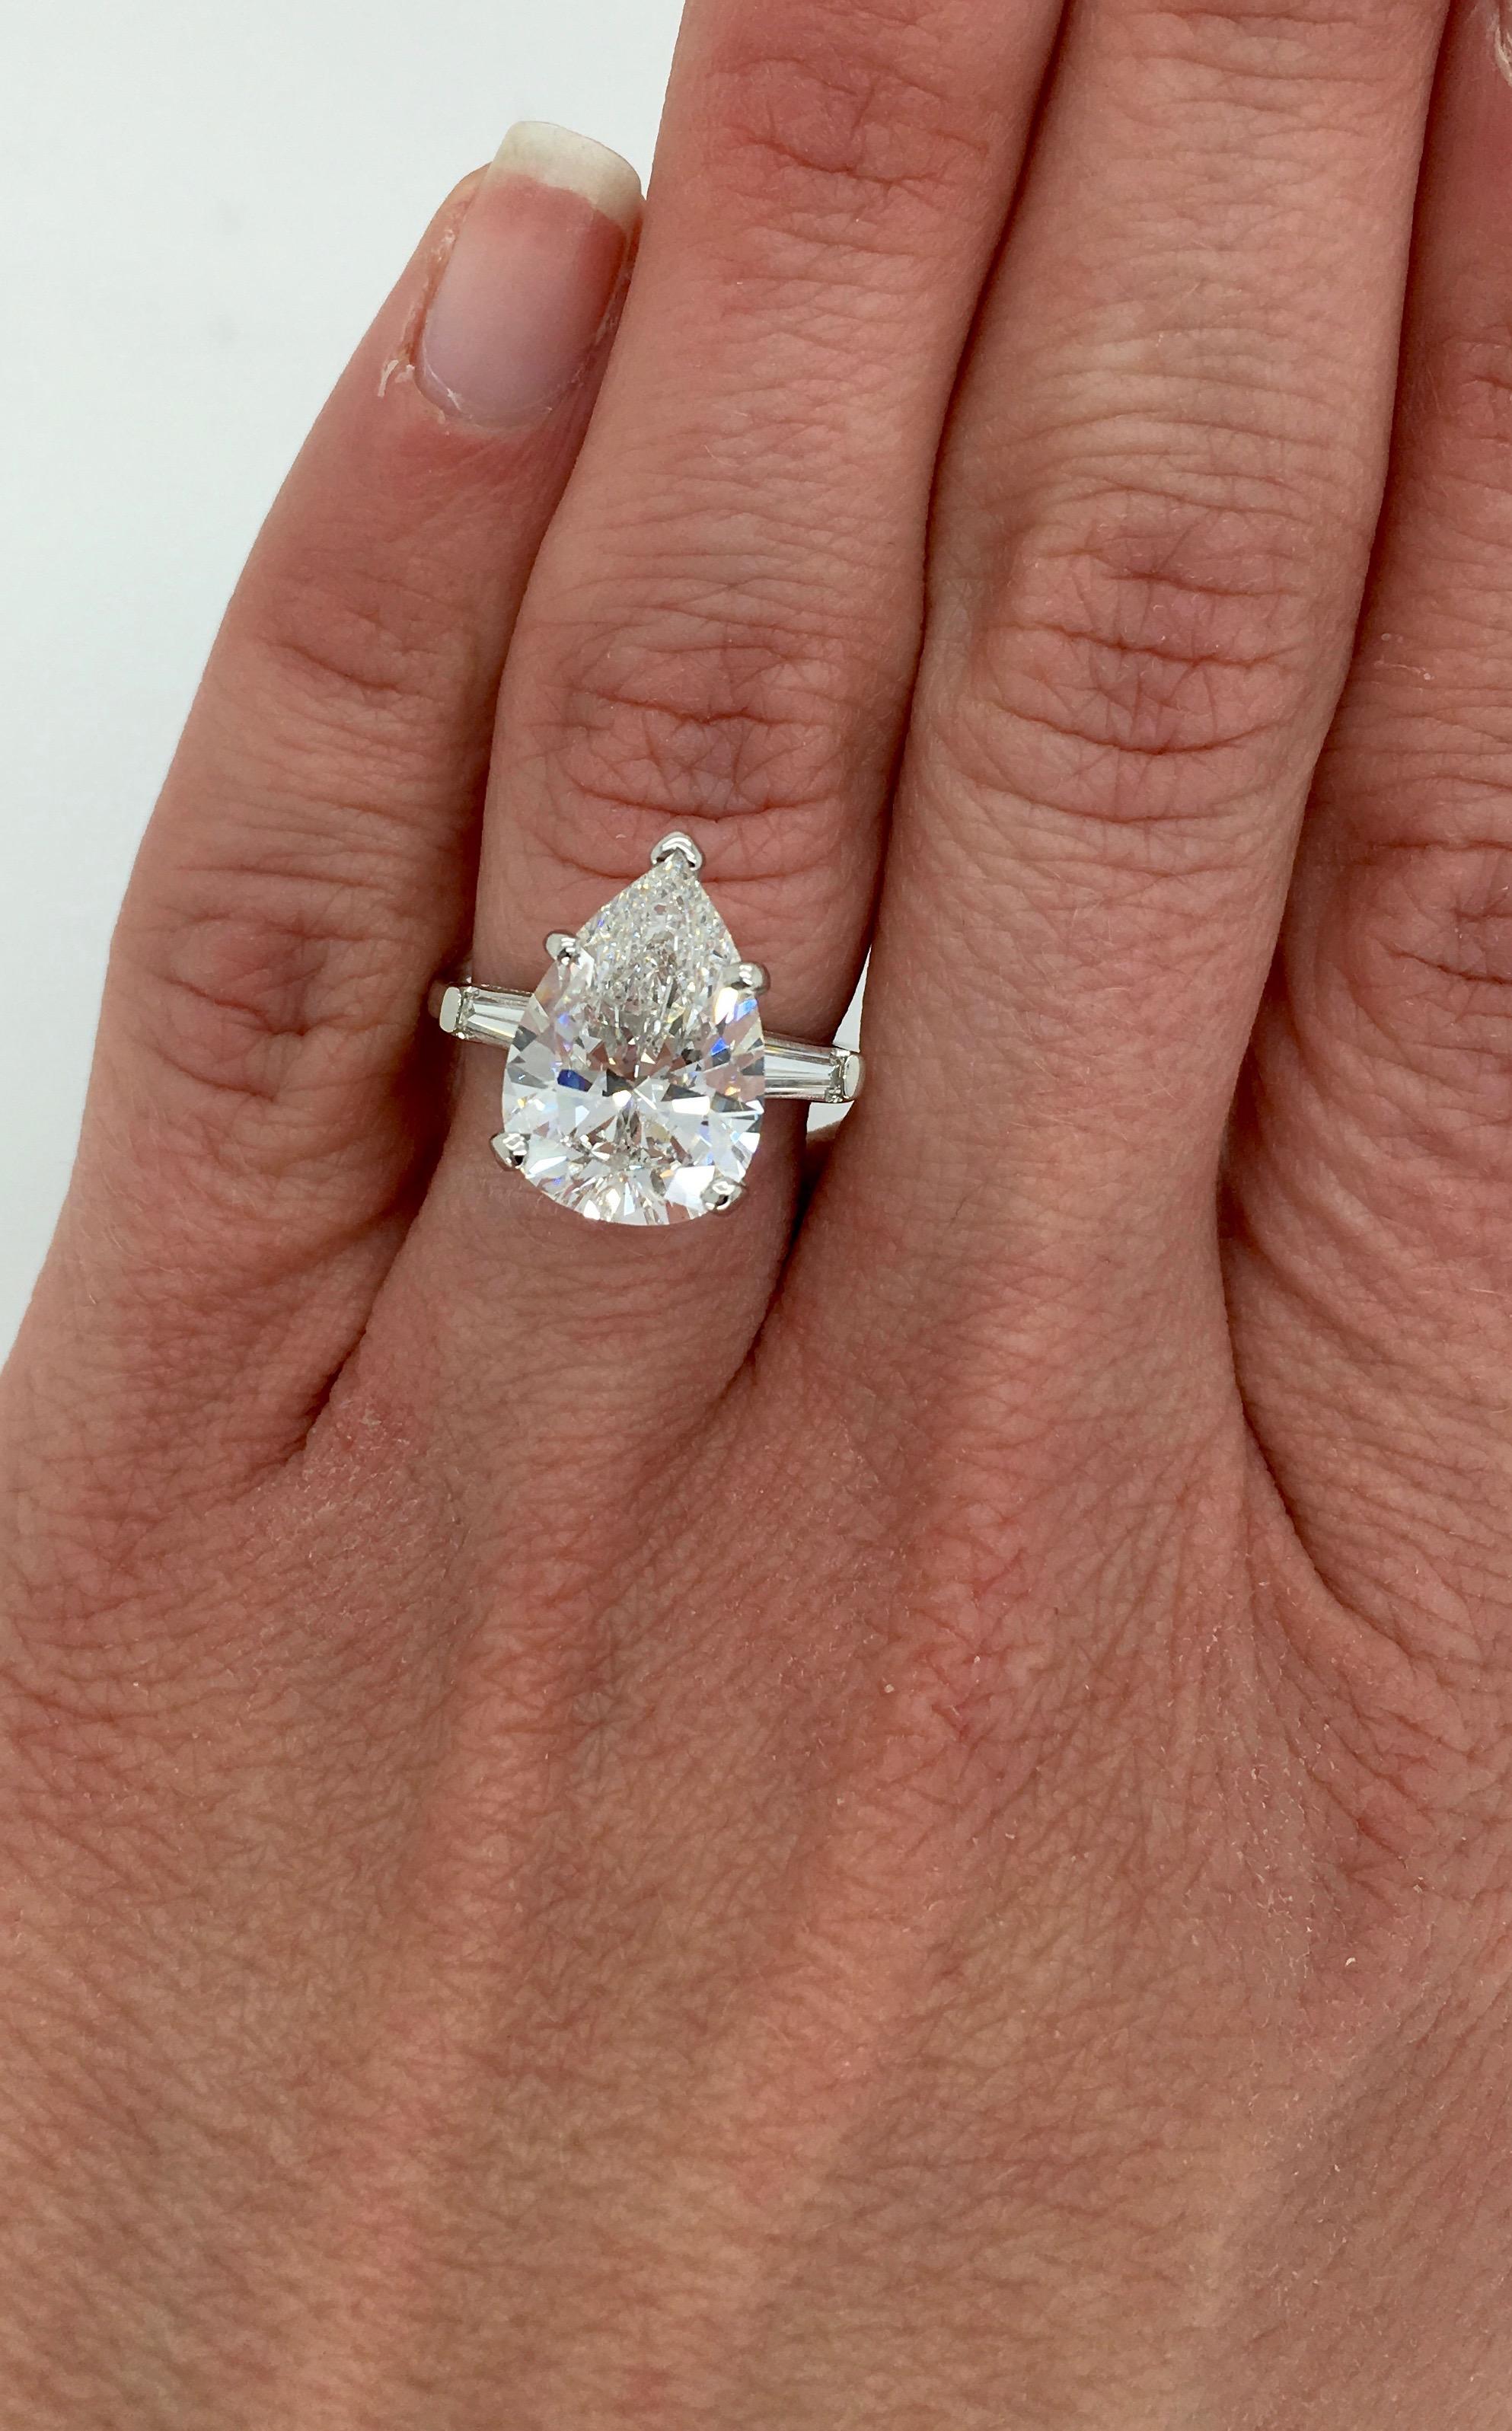 GIA certified 4.83CT Pear Cut Diamond ring with classic flanking Tapered Baguette Cut Diamonds.

GIA Certified #5192993300
Center Diamond Carat Weight: Approximately 4.83CT
Center Diamond Cut: Pear Cut
Center Diamond Color: F
Center Diamond Clarity: